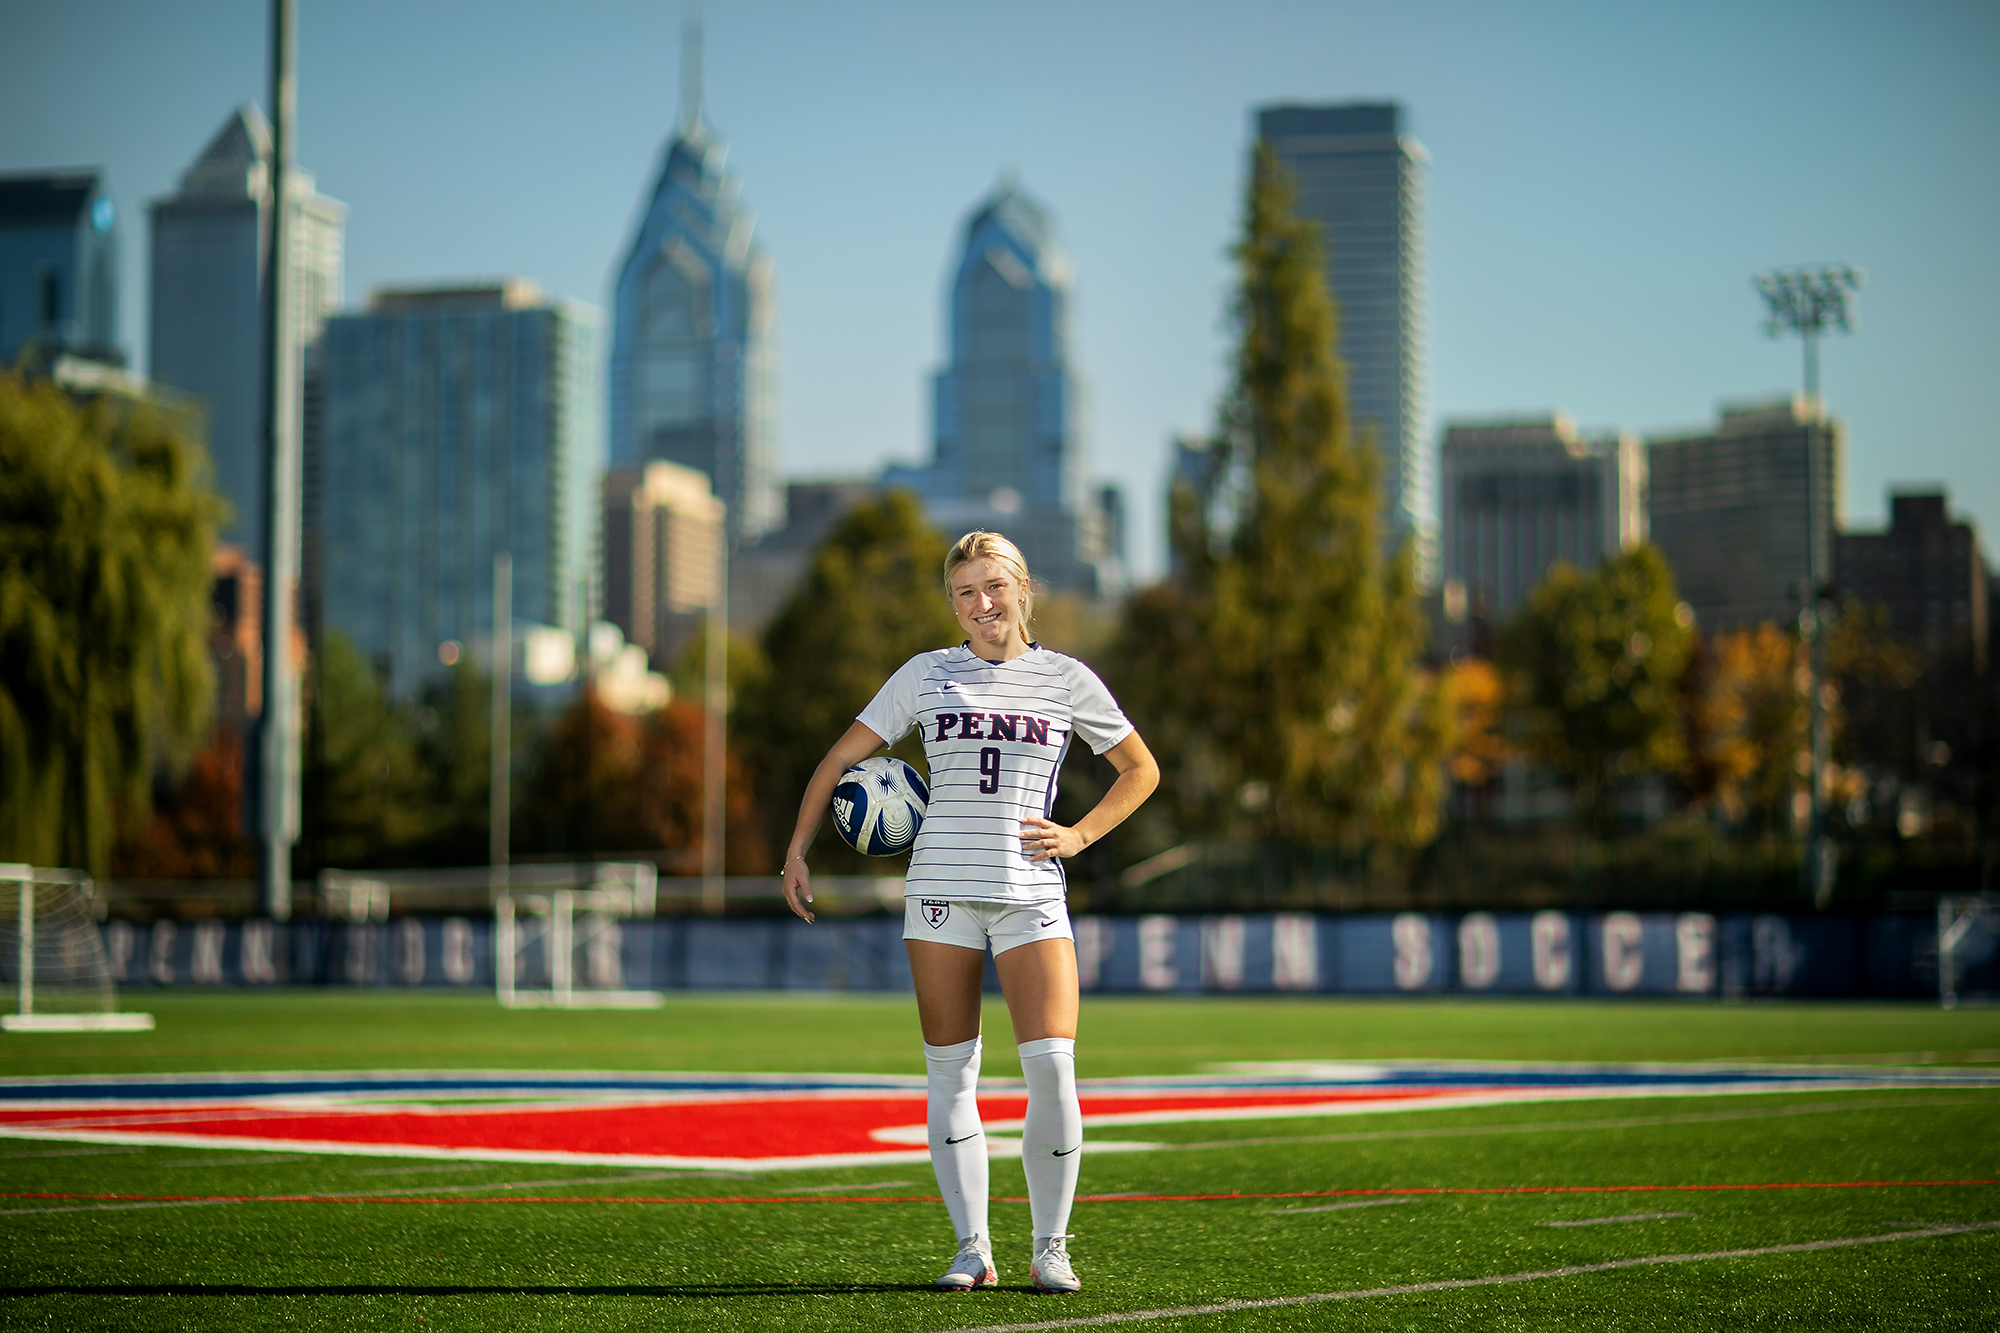 Lawton stands confidentally in the soccer field with her hand on one hip and the other draped over a soccer ball in front of the philadelphia skyline.